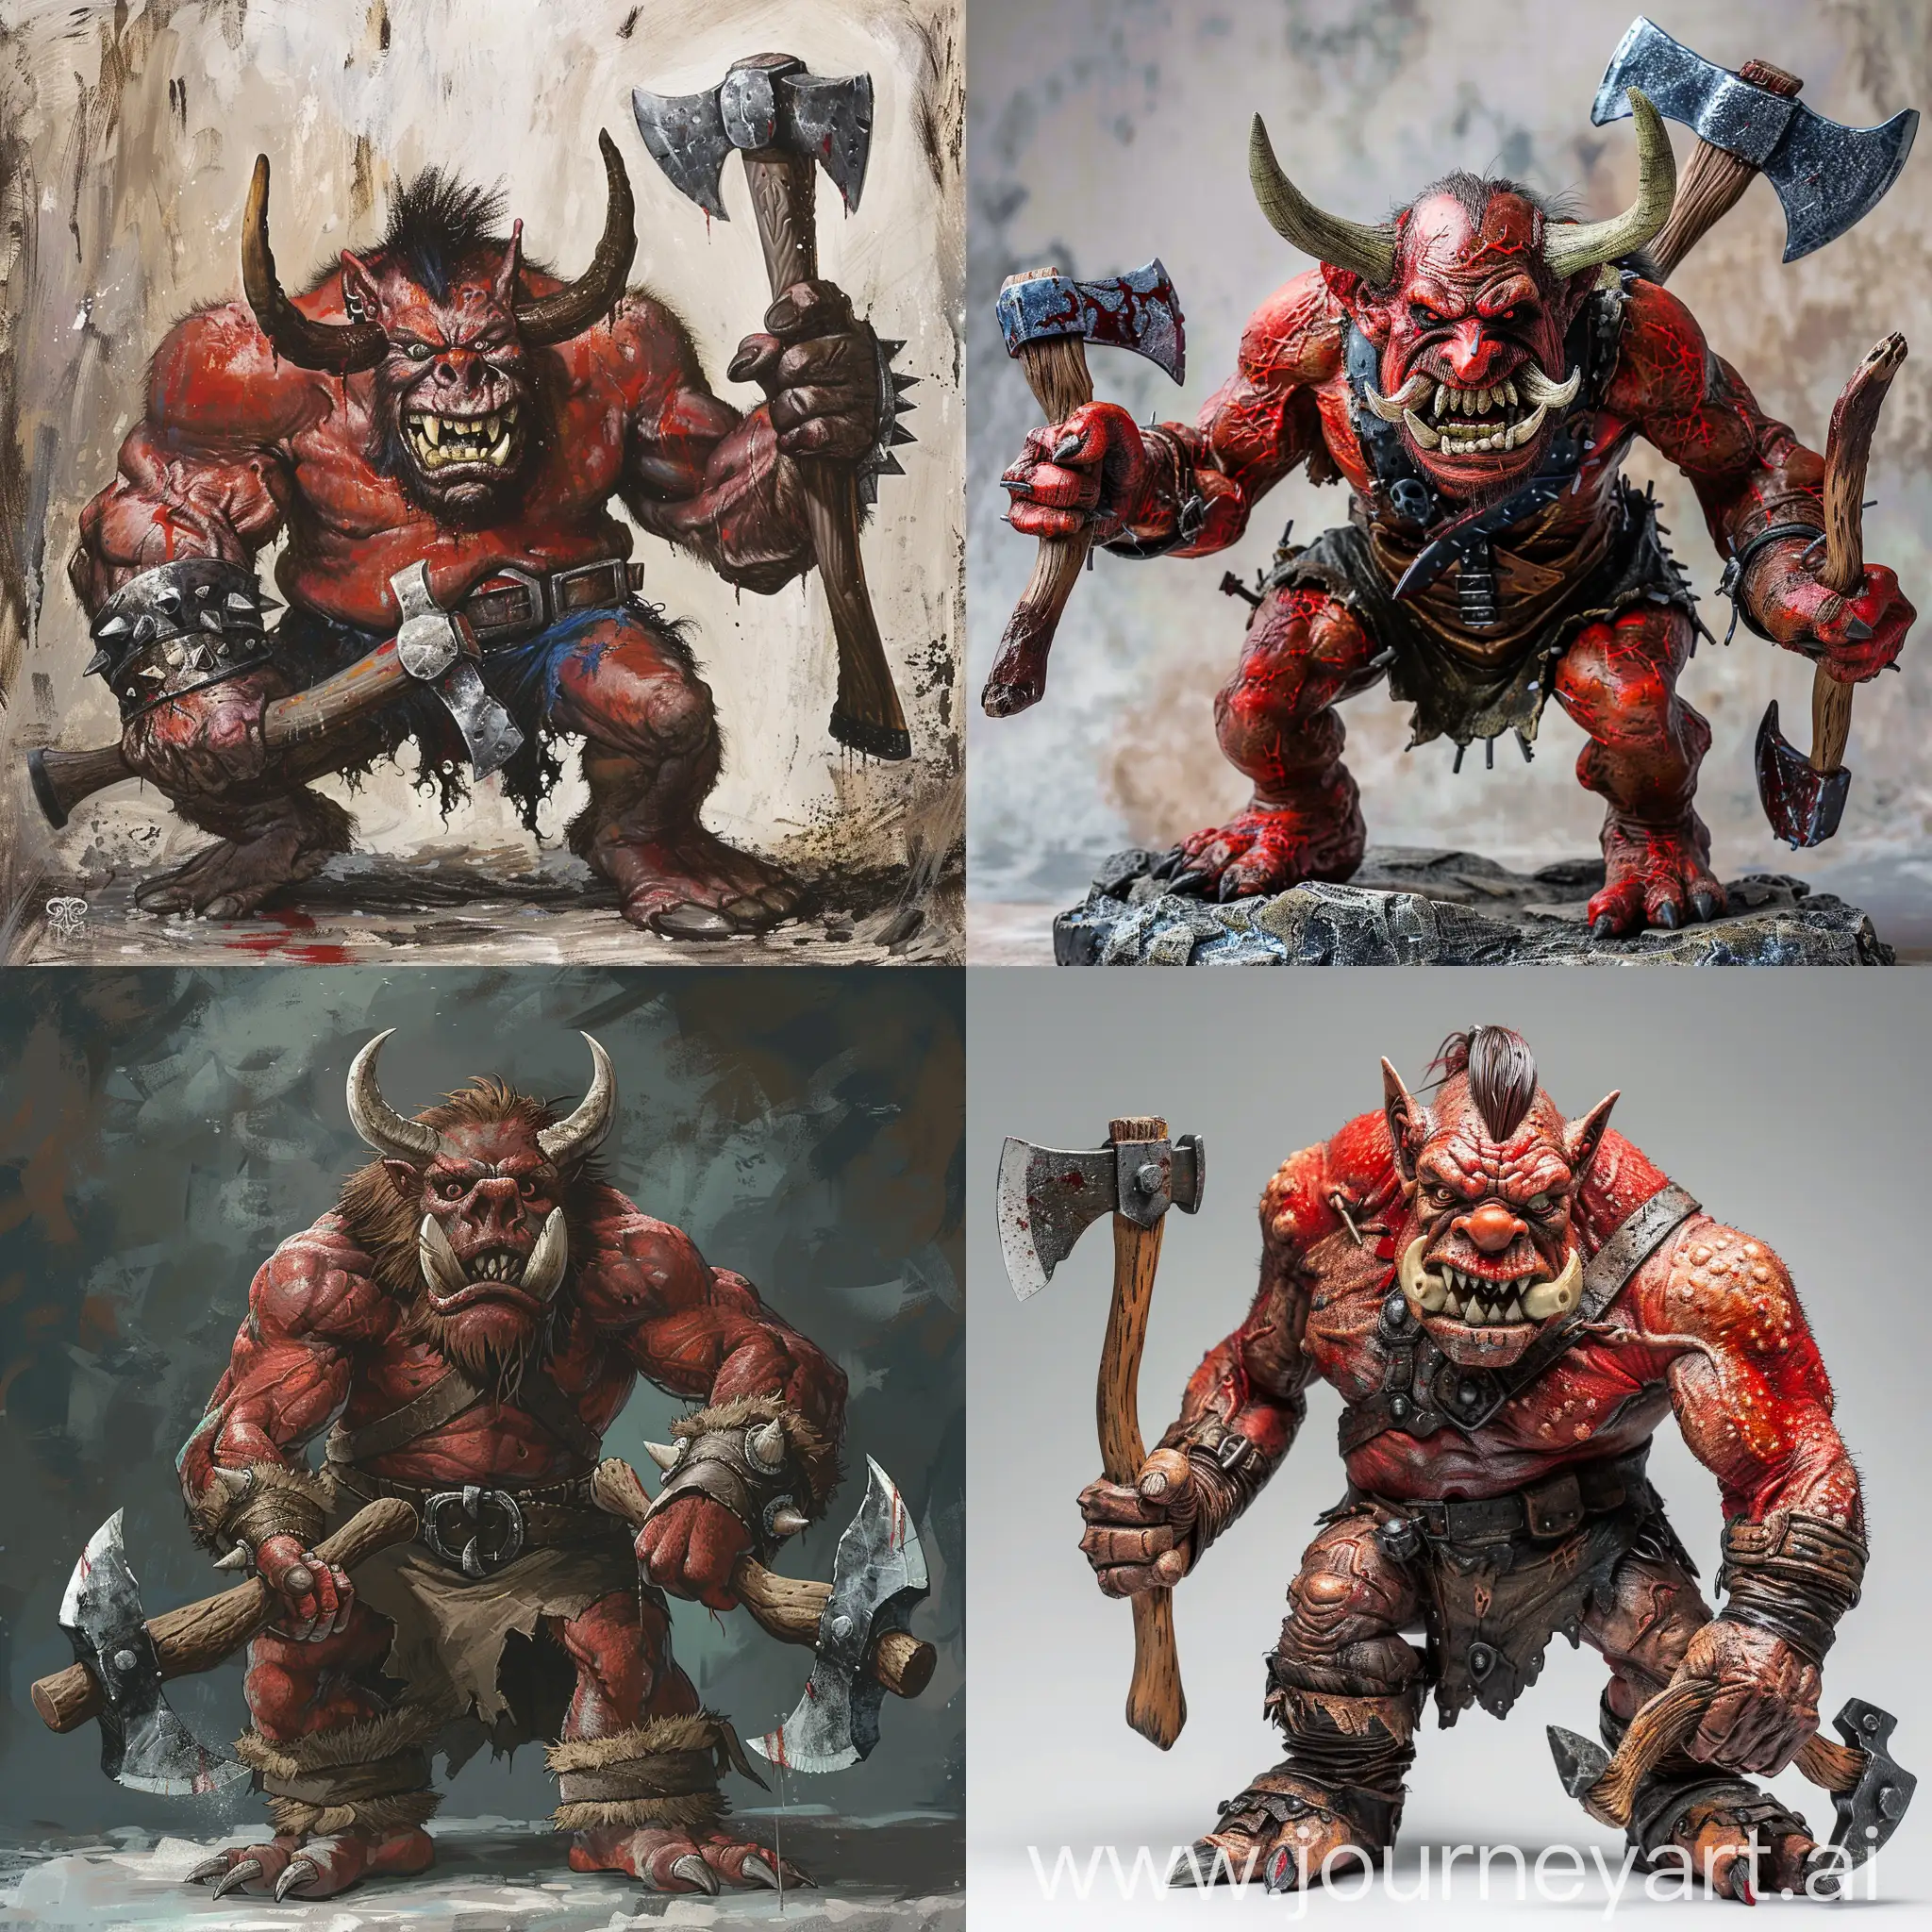 red skin crazy troll with tusks, axes in hands